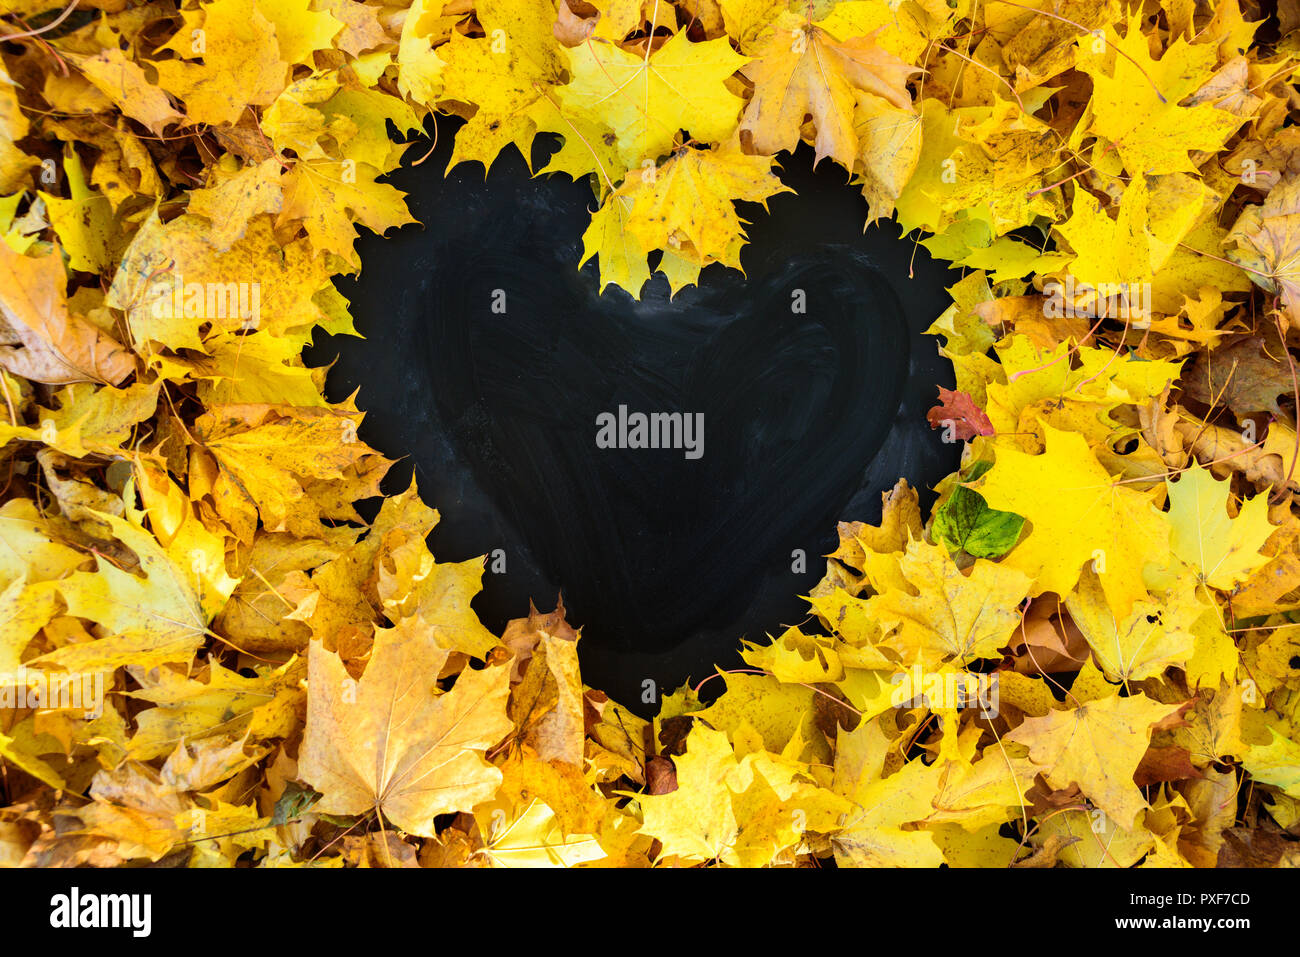 Blackboard with frame of leaves in heart shape. Frame is empty. Stock Photo